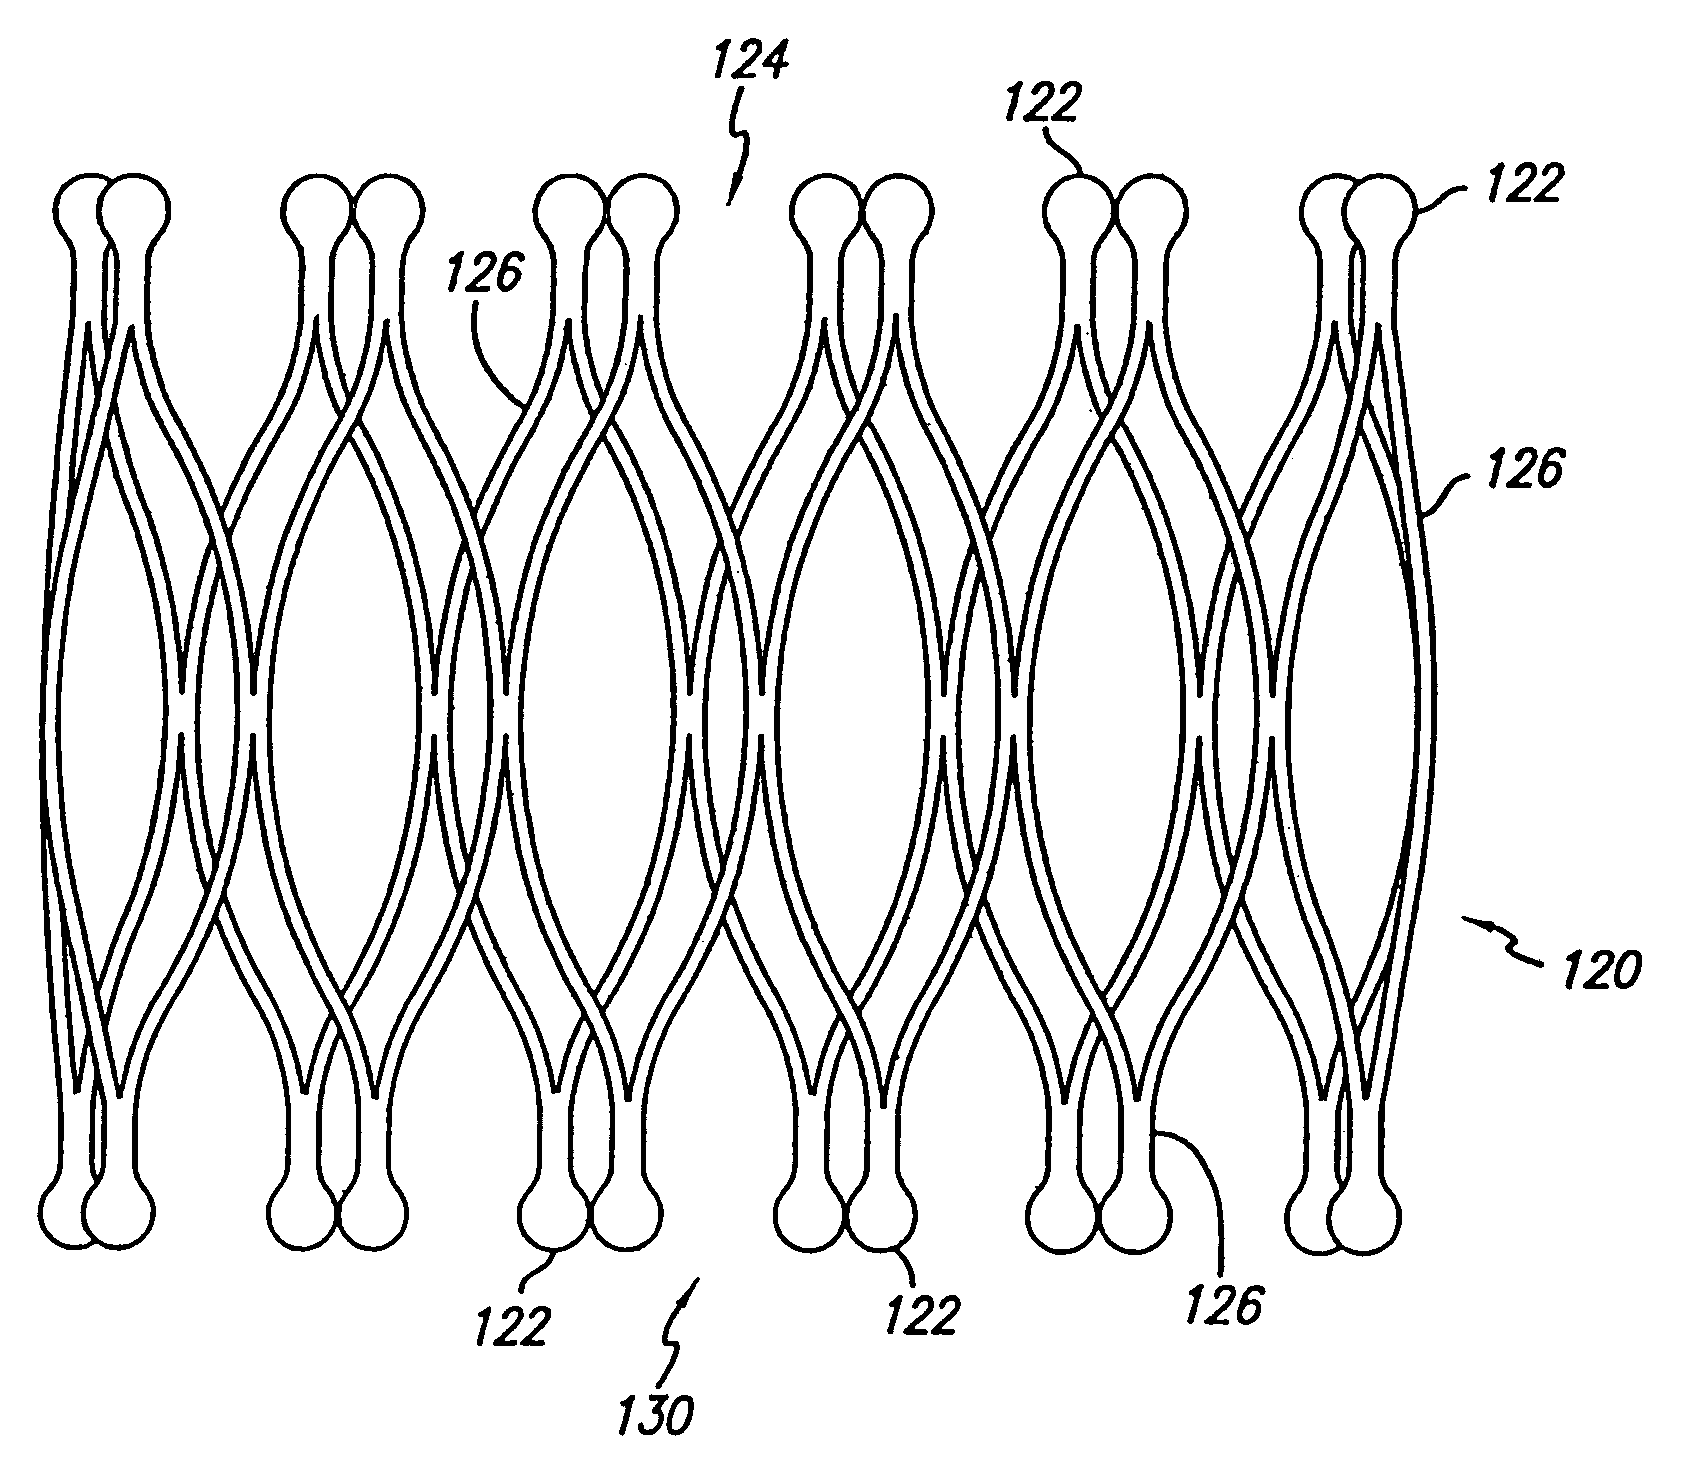 Single-piece endoprosthesis with high expansion ratios and atraumatic ends